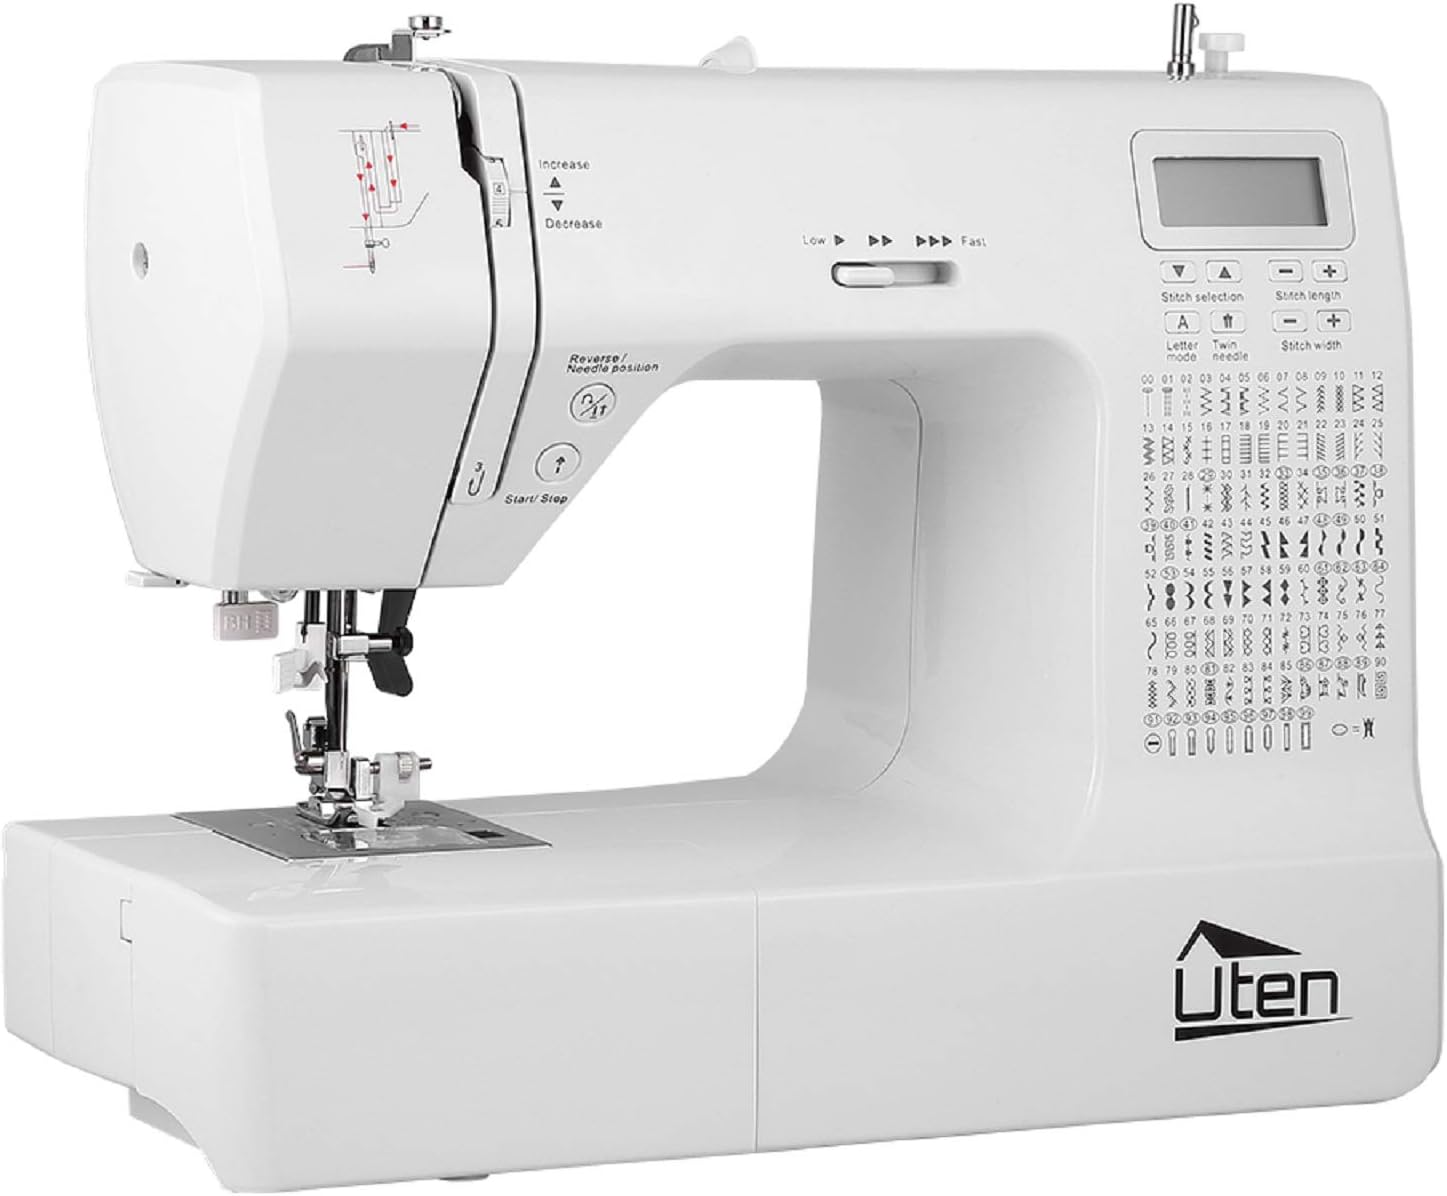 Portable Sewing Machine Computerized Embroidery Sewing Machine with 200 Unique Built-in Stitch and 8 Buttonholes Review